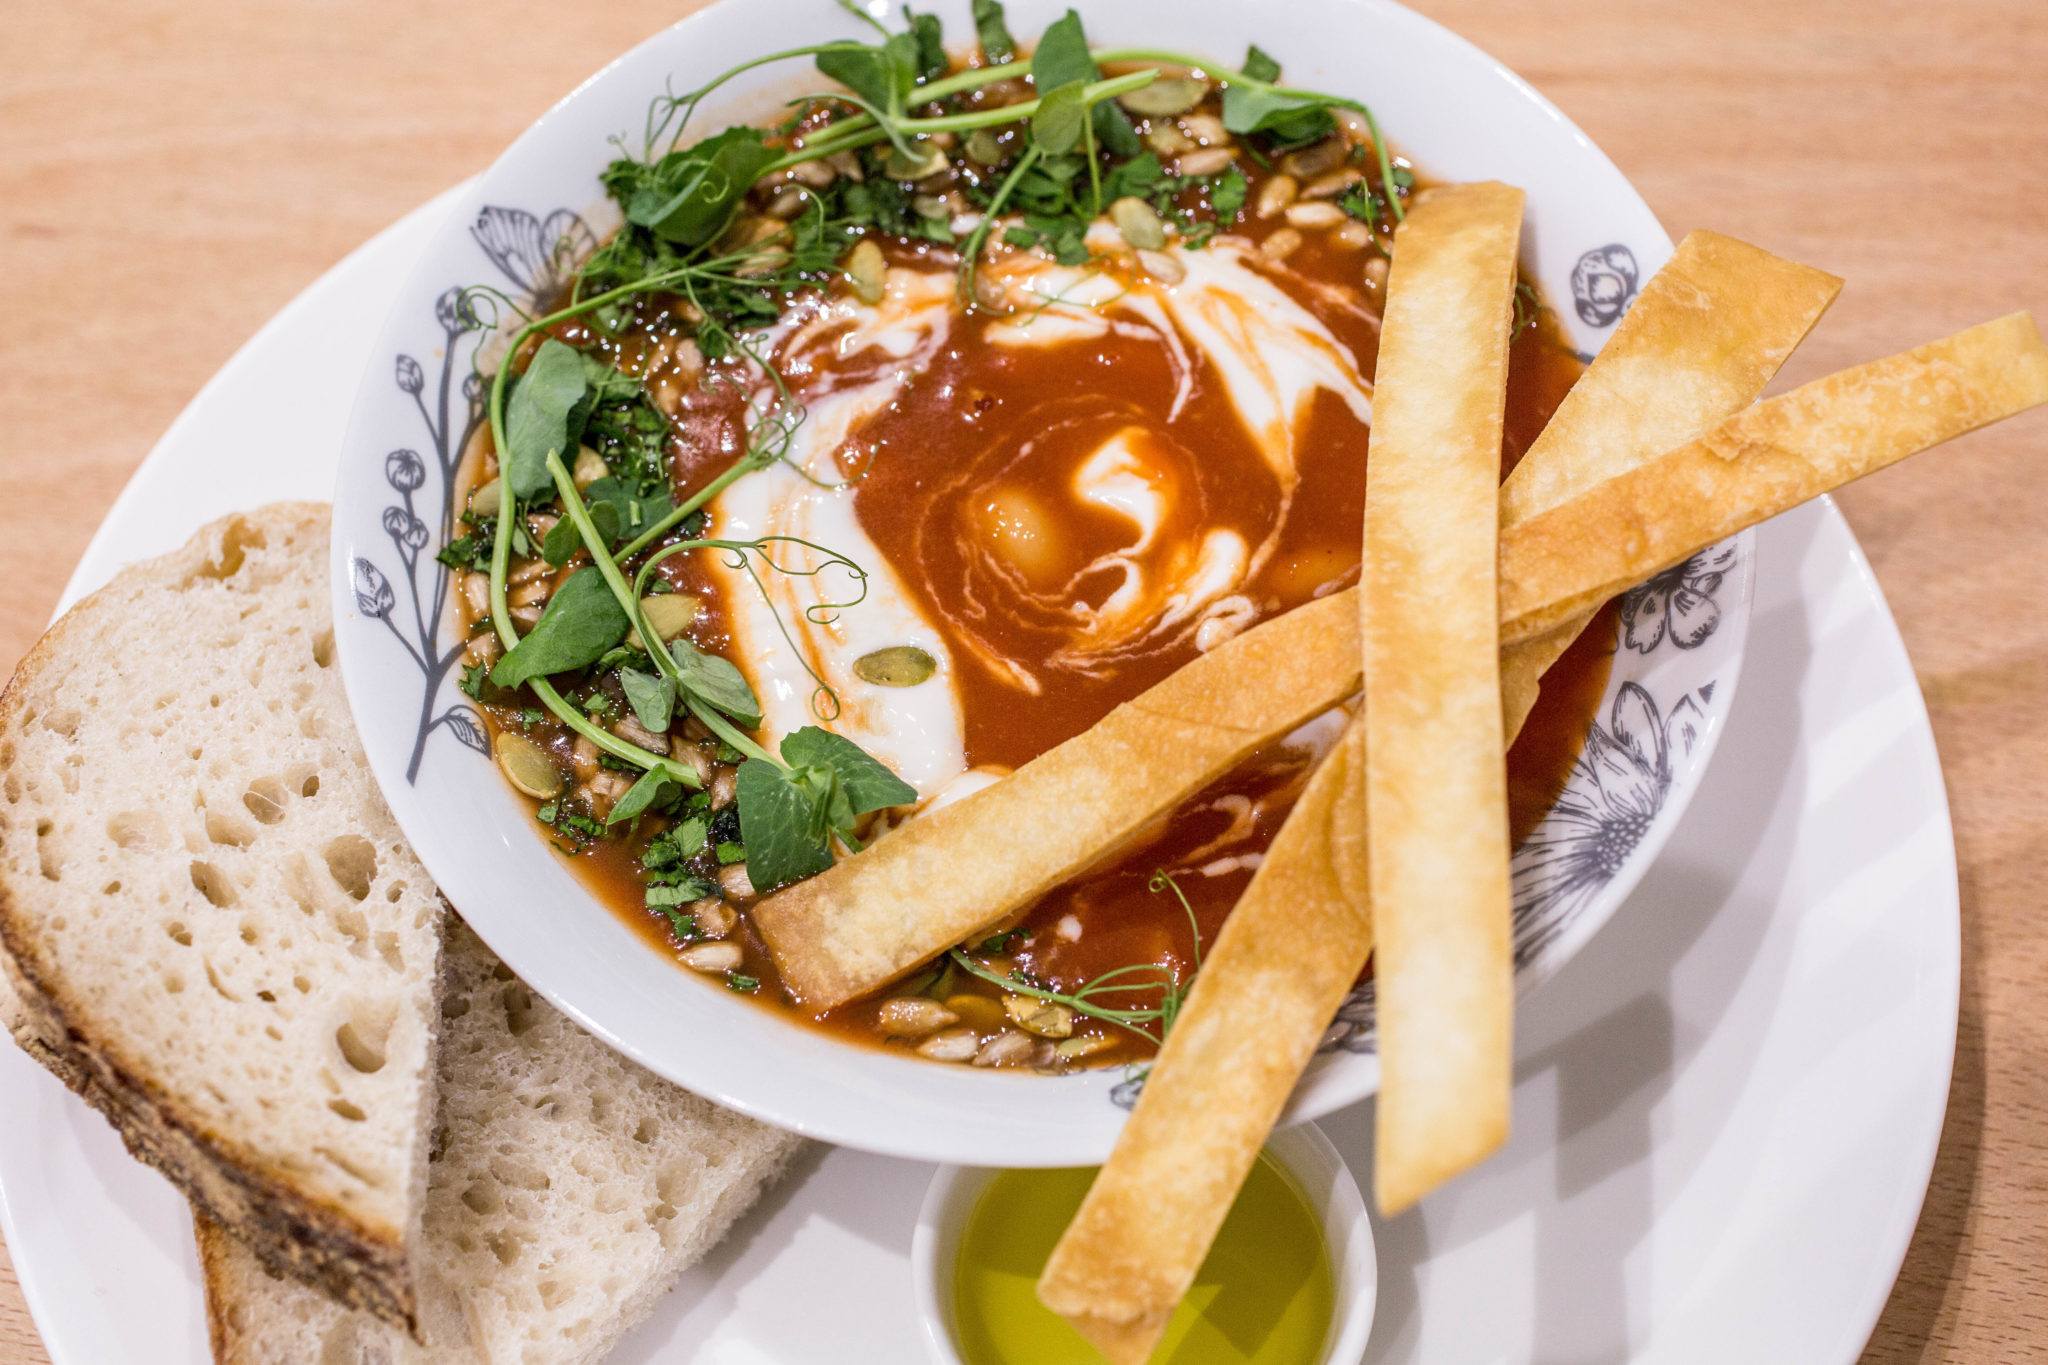 A rich vegetarian stew or soup garnished with sour cream, sprouts, and pita chips with bread and hot sauce on the side. The Canna Kitchen uses the finest ingredients to create delicious, healthful vegetarian and vegan CBD-infused dishes.